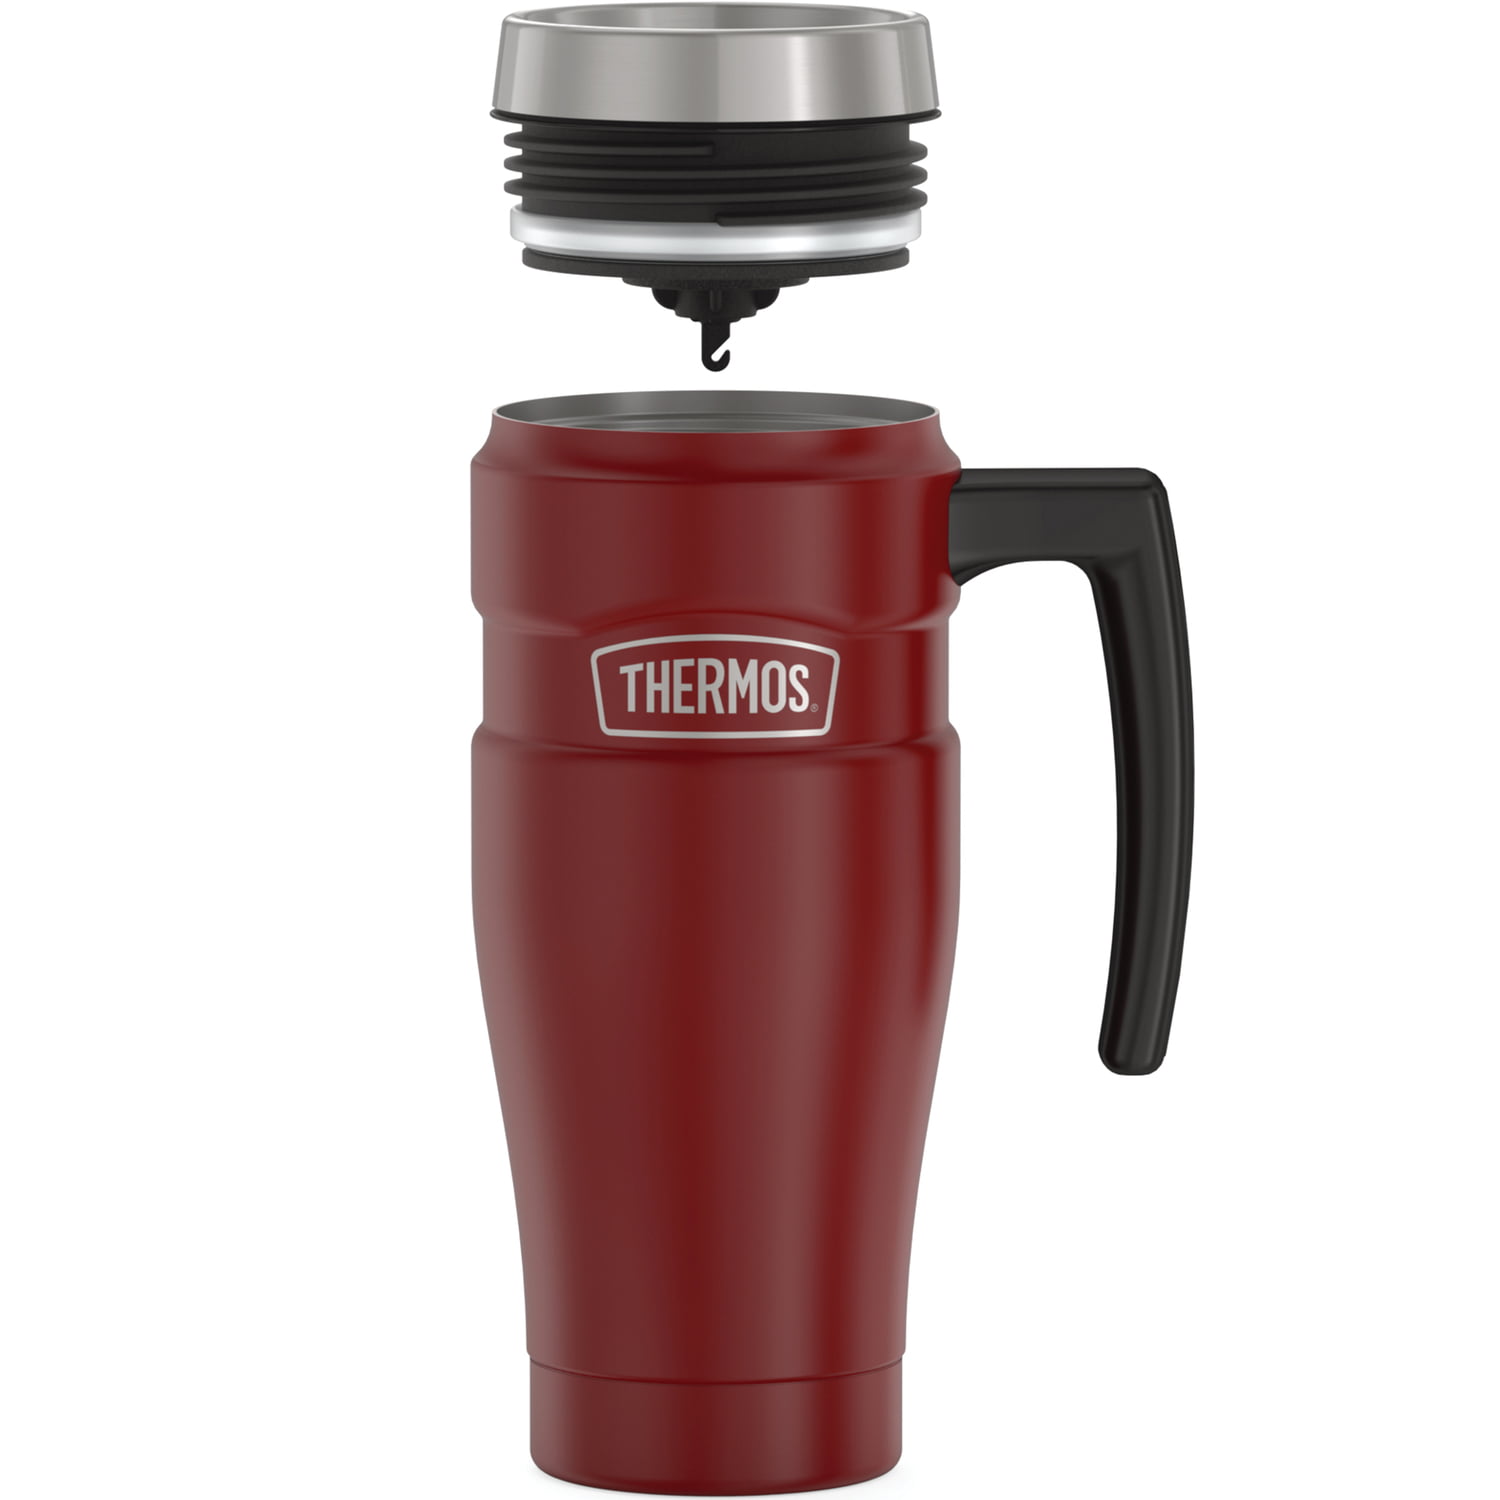 Sipp Vacuum Insulated Stainless Steel Travel Tumbler Thermos 16 oz 